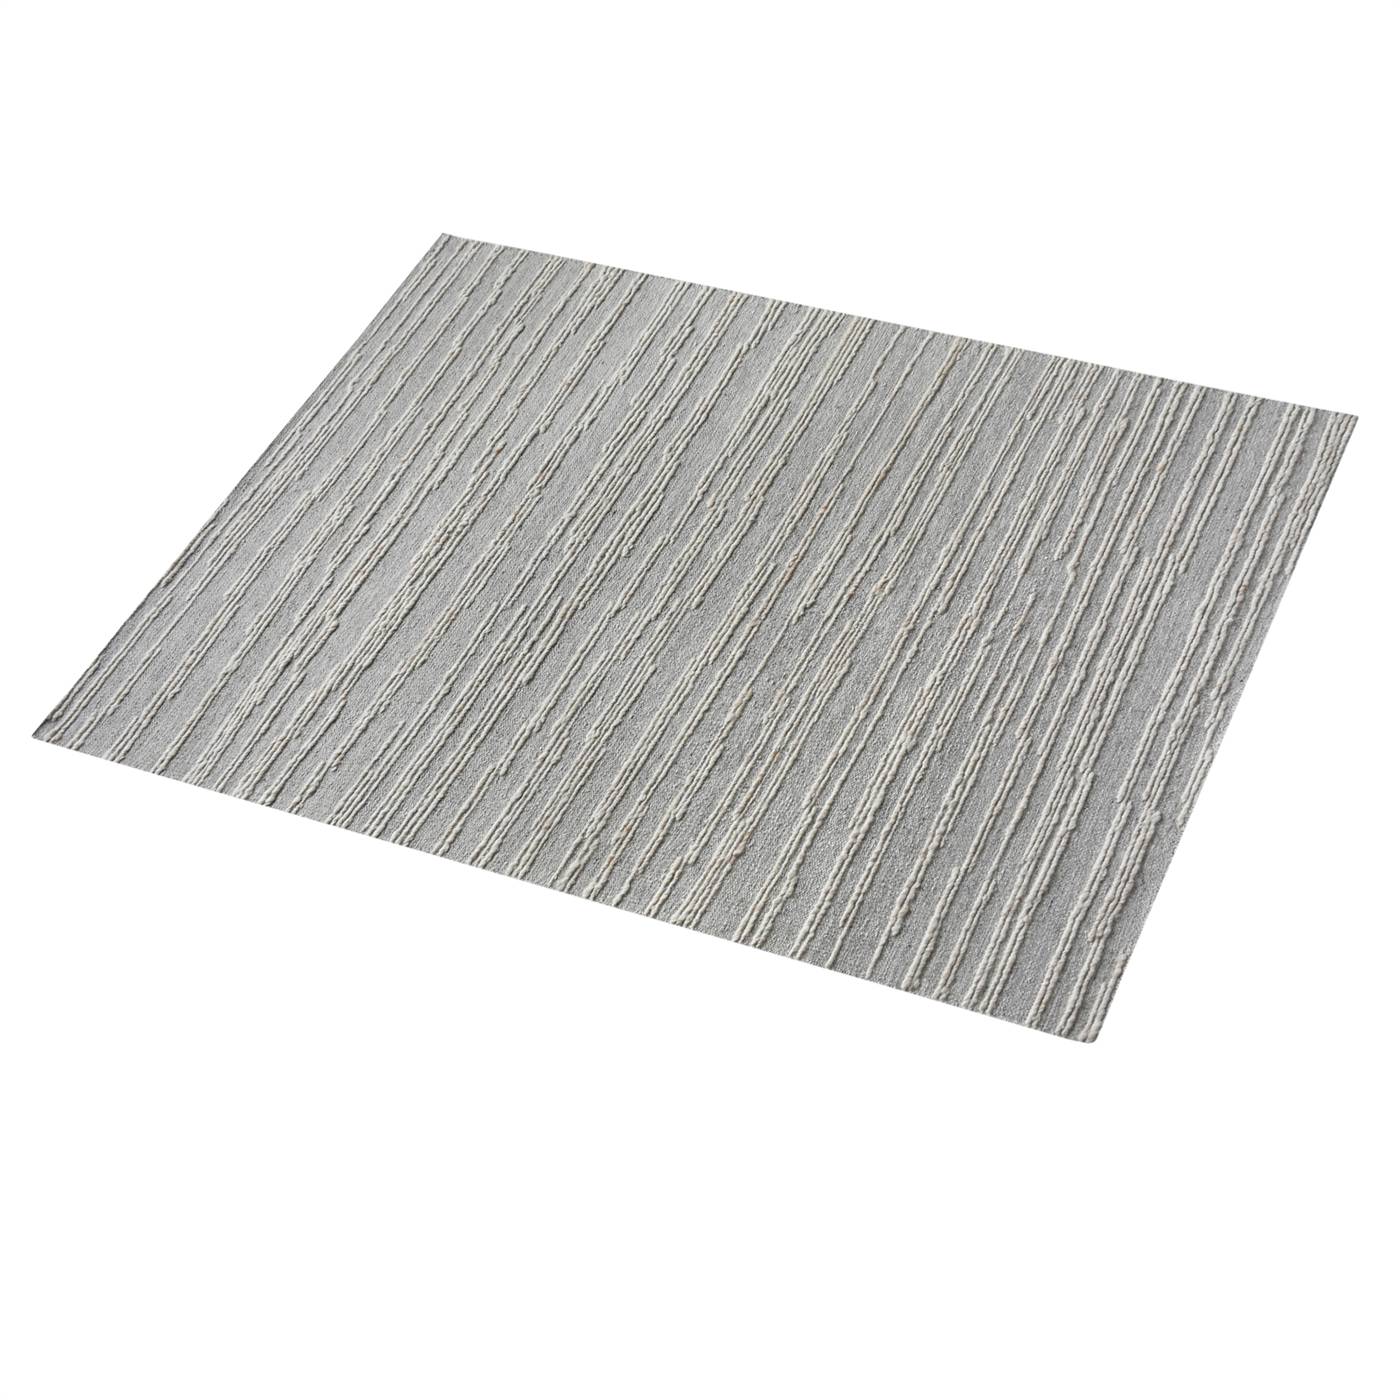 Area Rug, Bedroom Rug, Living Room Rug, Living Area Rug, Indian Rug, Office Carpet, Office Rug, Shop Rug Online, Grey, Natural White , Wool, Hand Knotted , Handknotted, Flat Weave, Intricate